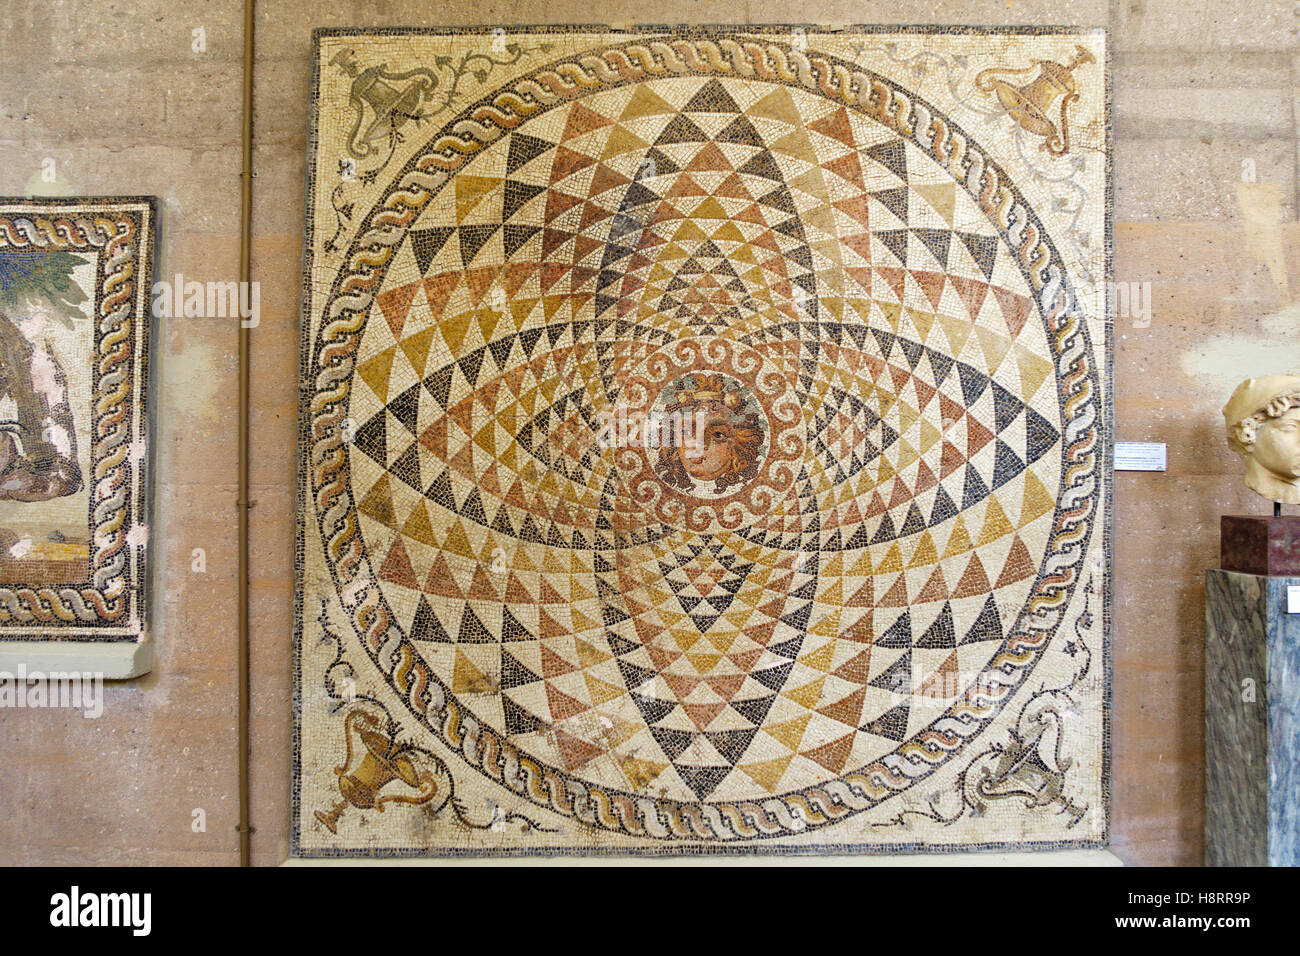 Roman mosaics at the Archaeological Museum of Ancient Corinth, Corinth, Greece, Europe Stock Photo